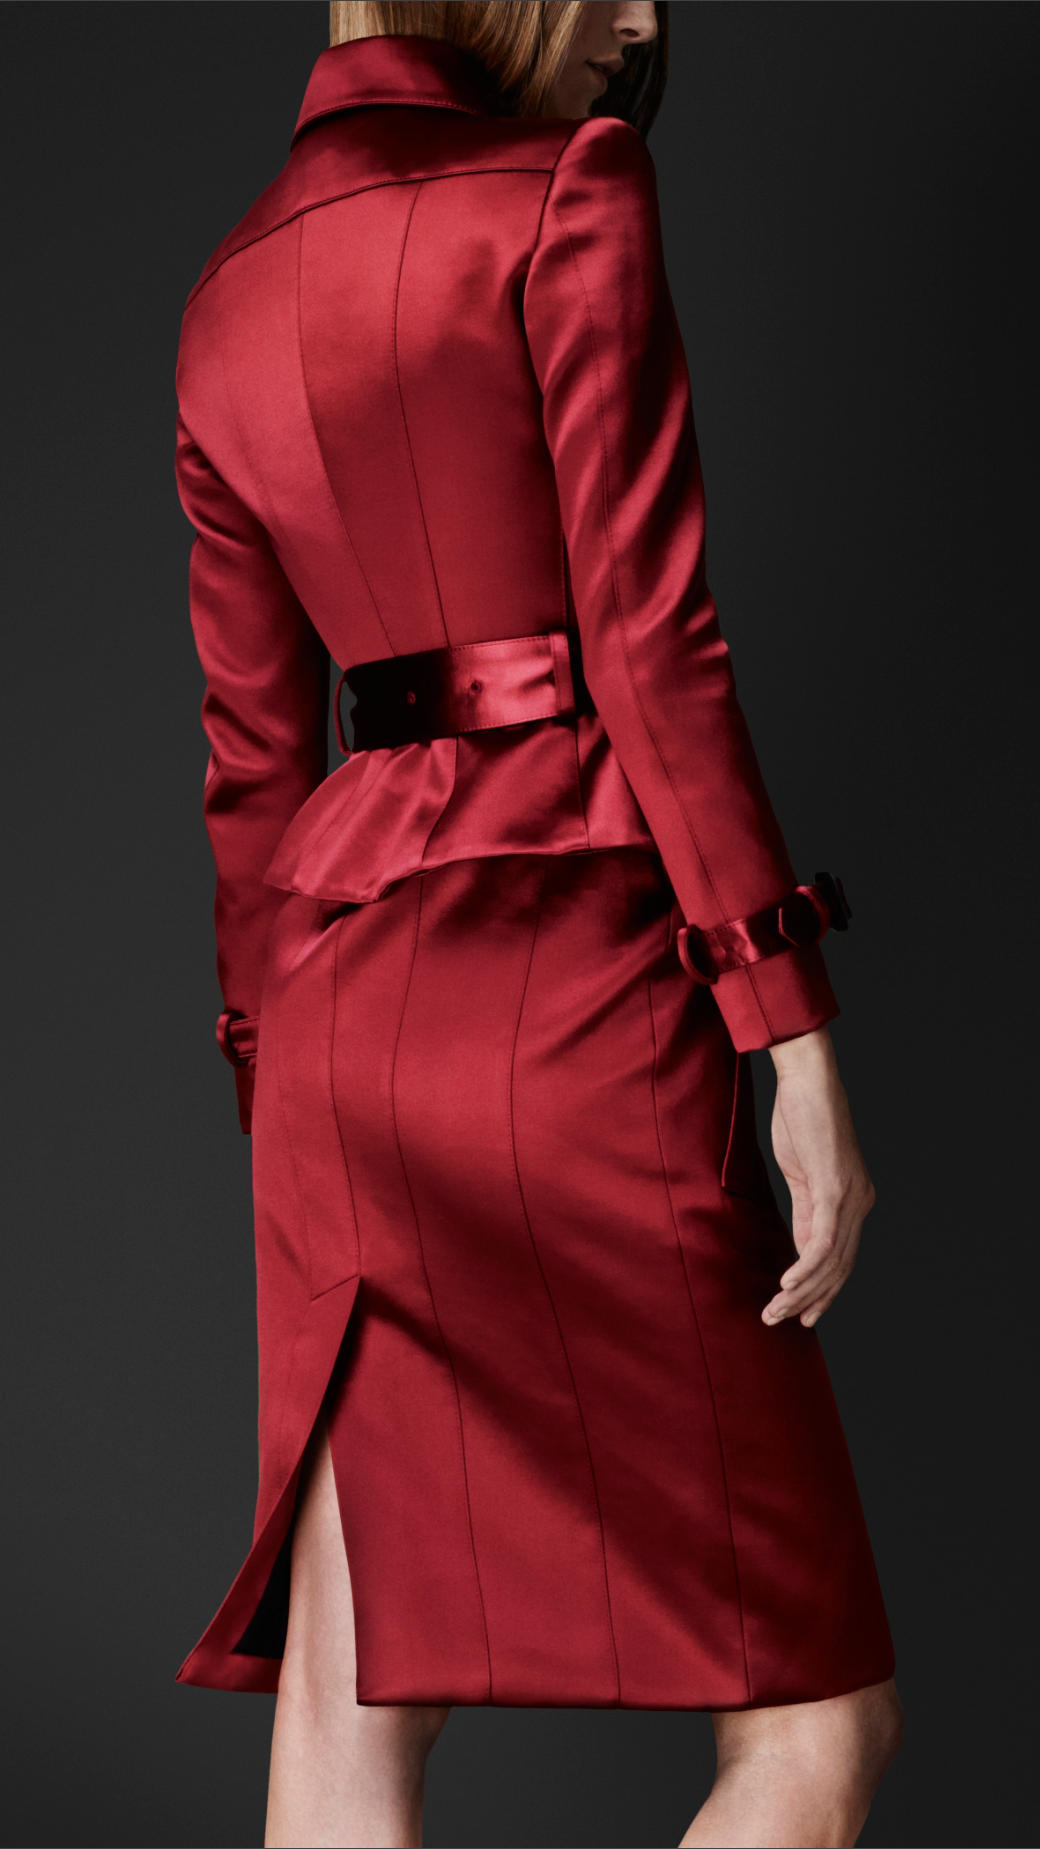 Lyst - Burberry Prorsum Satin Bustier Trench Coat in Red